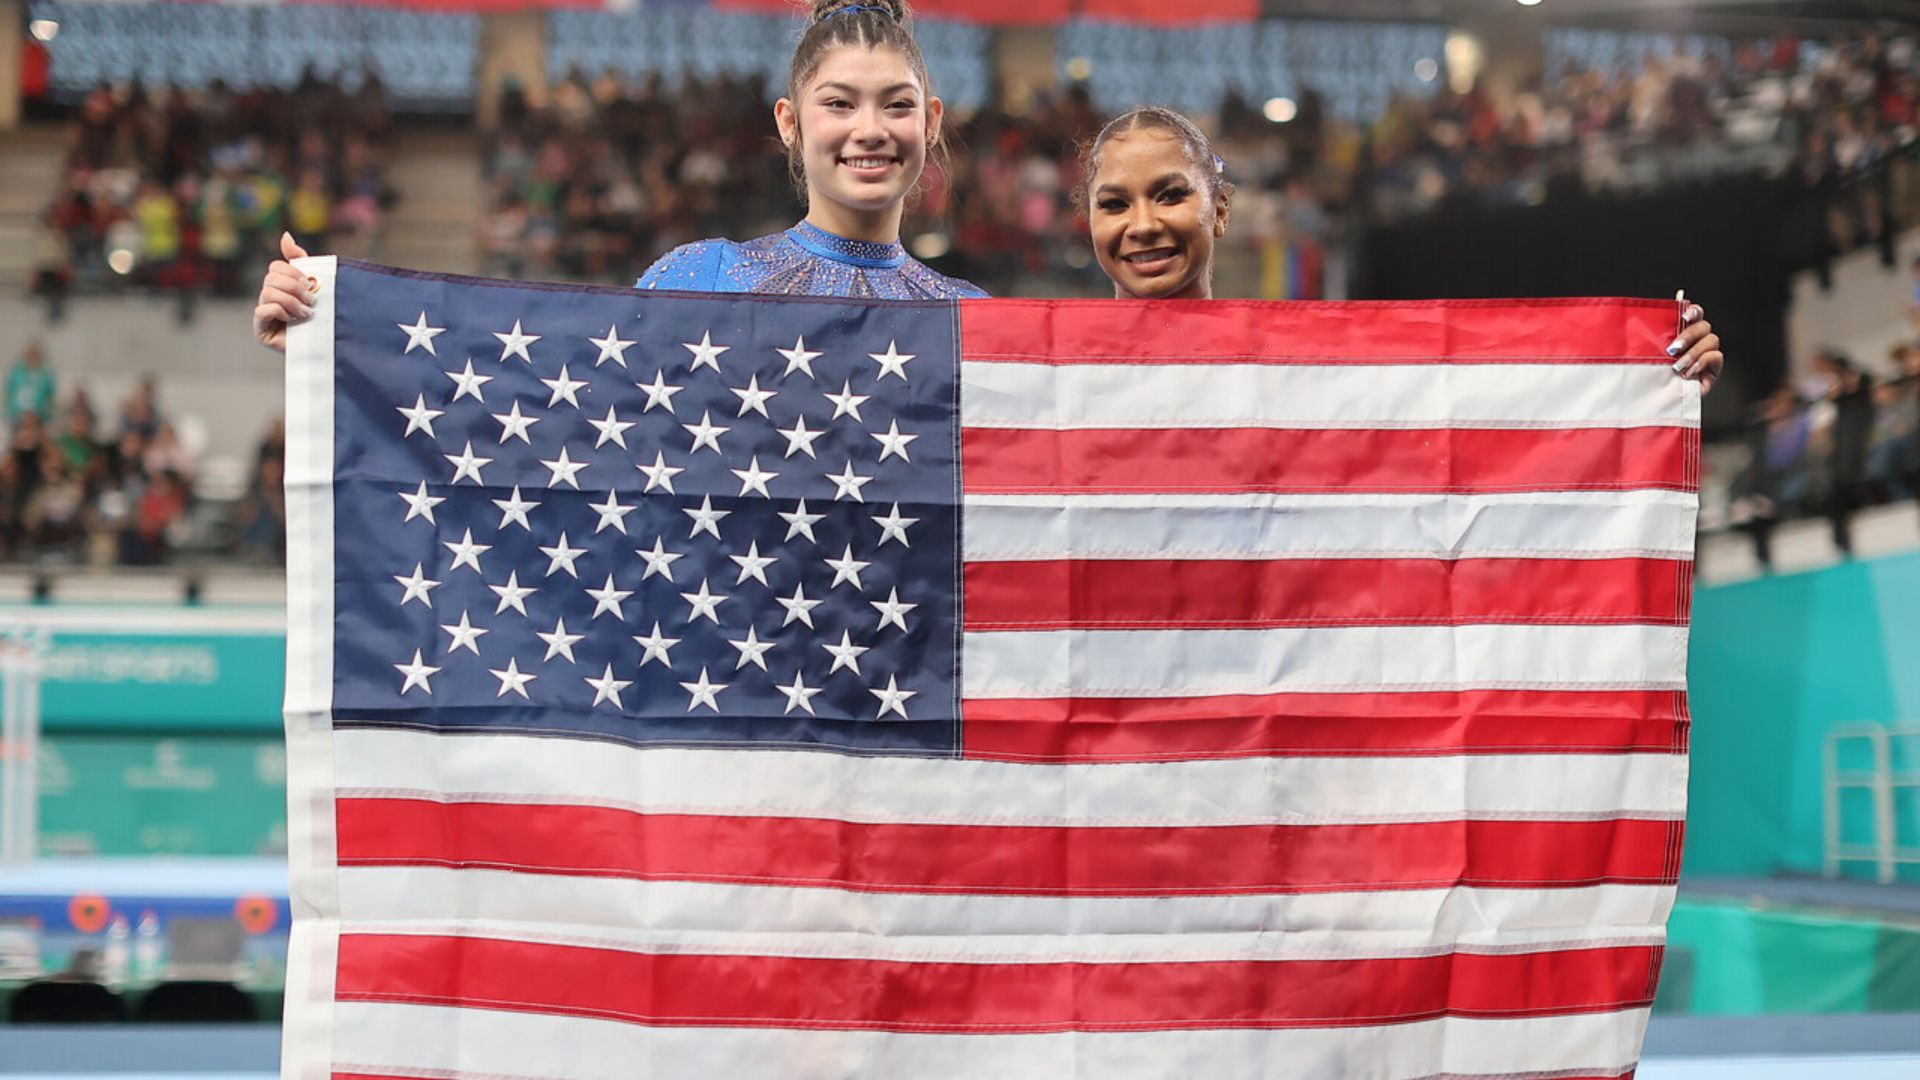 USA leads in gymnastics, 3x3 basketball, and dressage